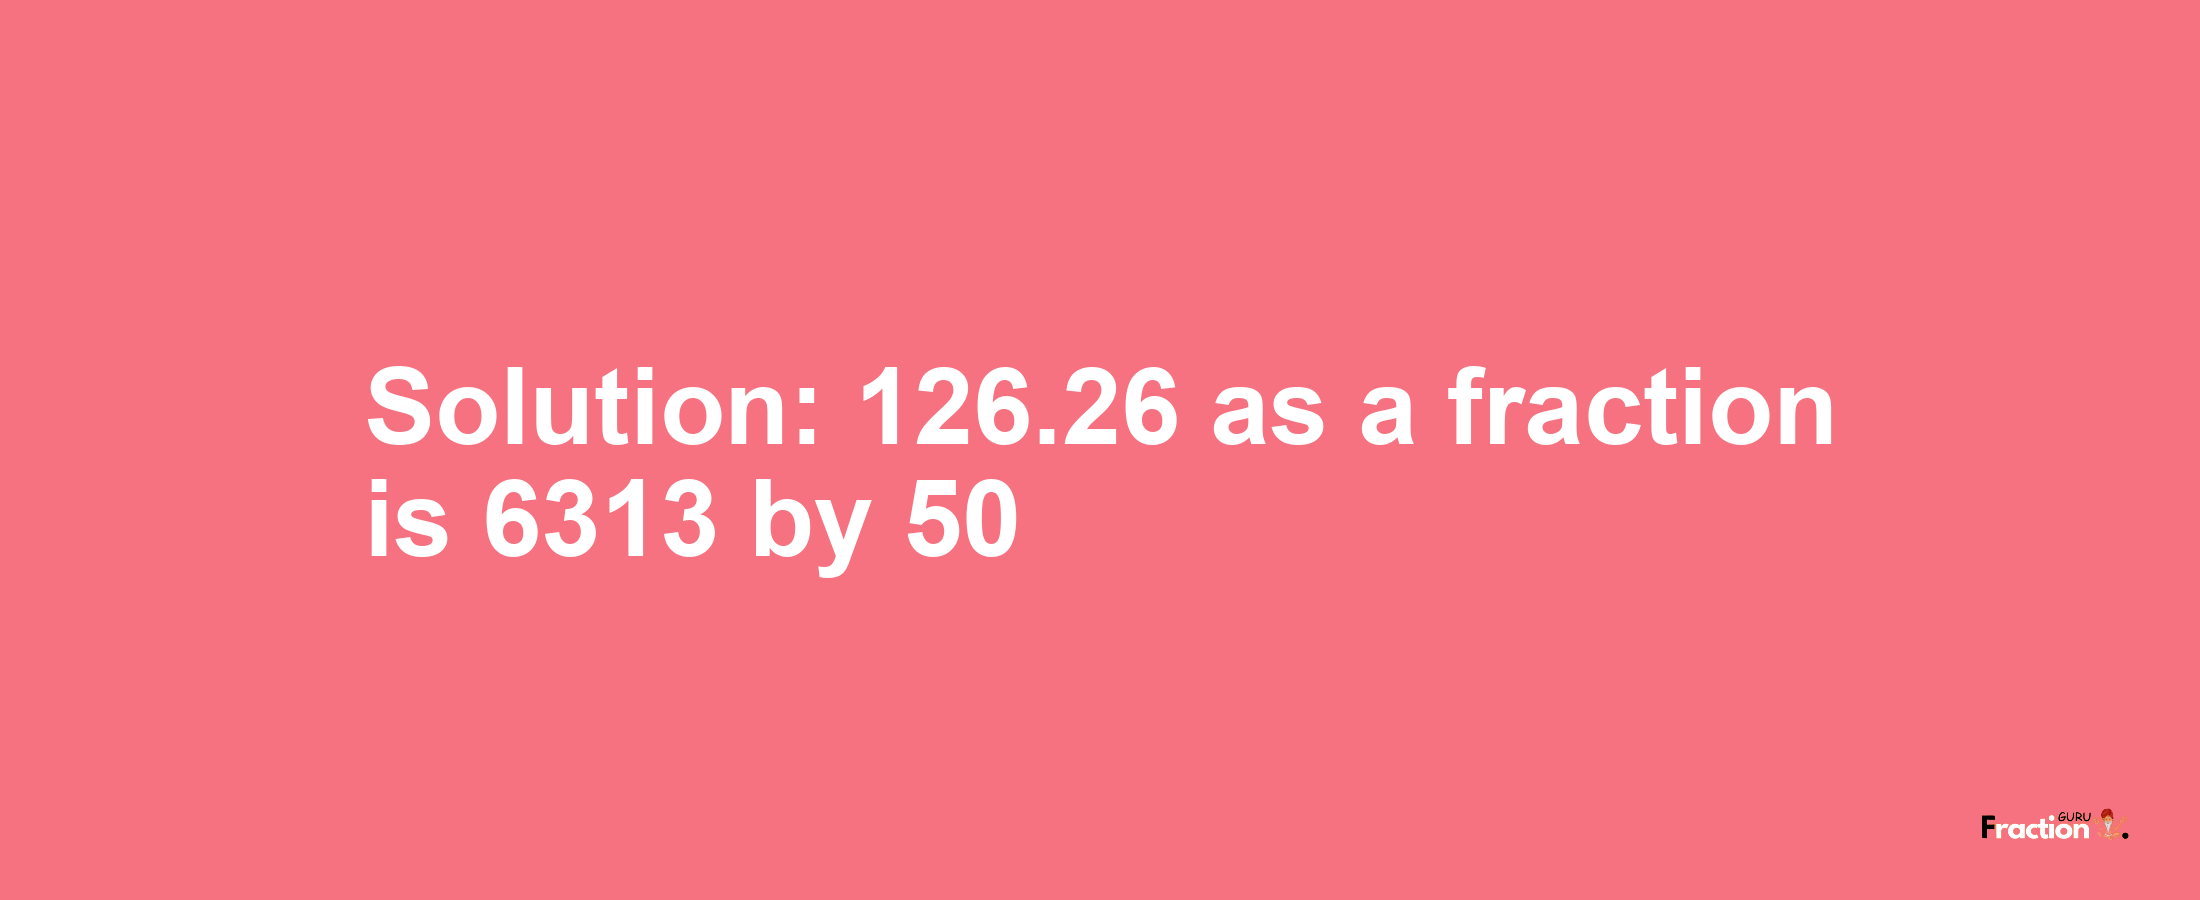 Solution:126.26 as a fraction is 6313/50